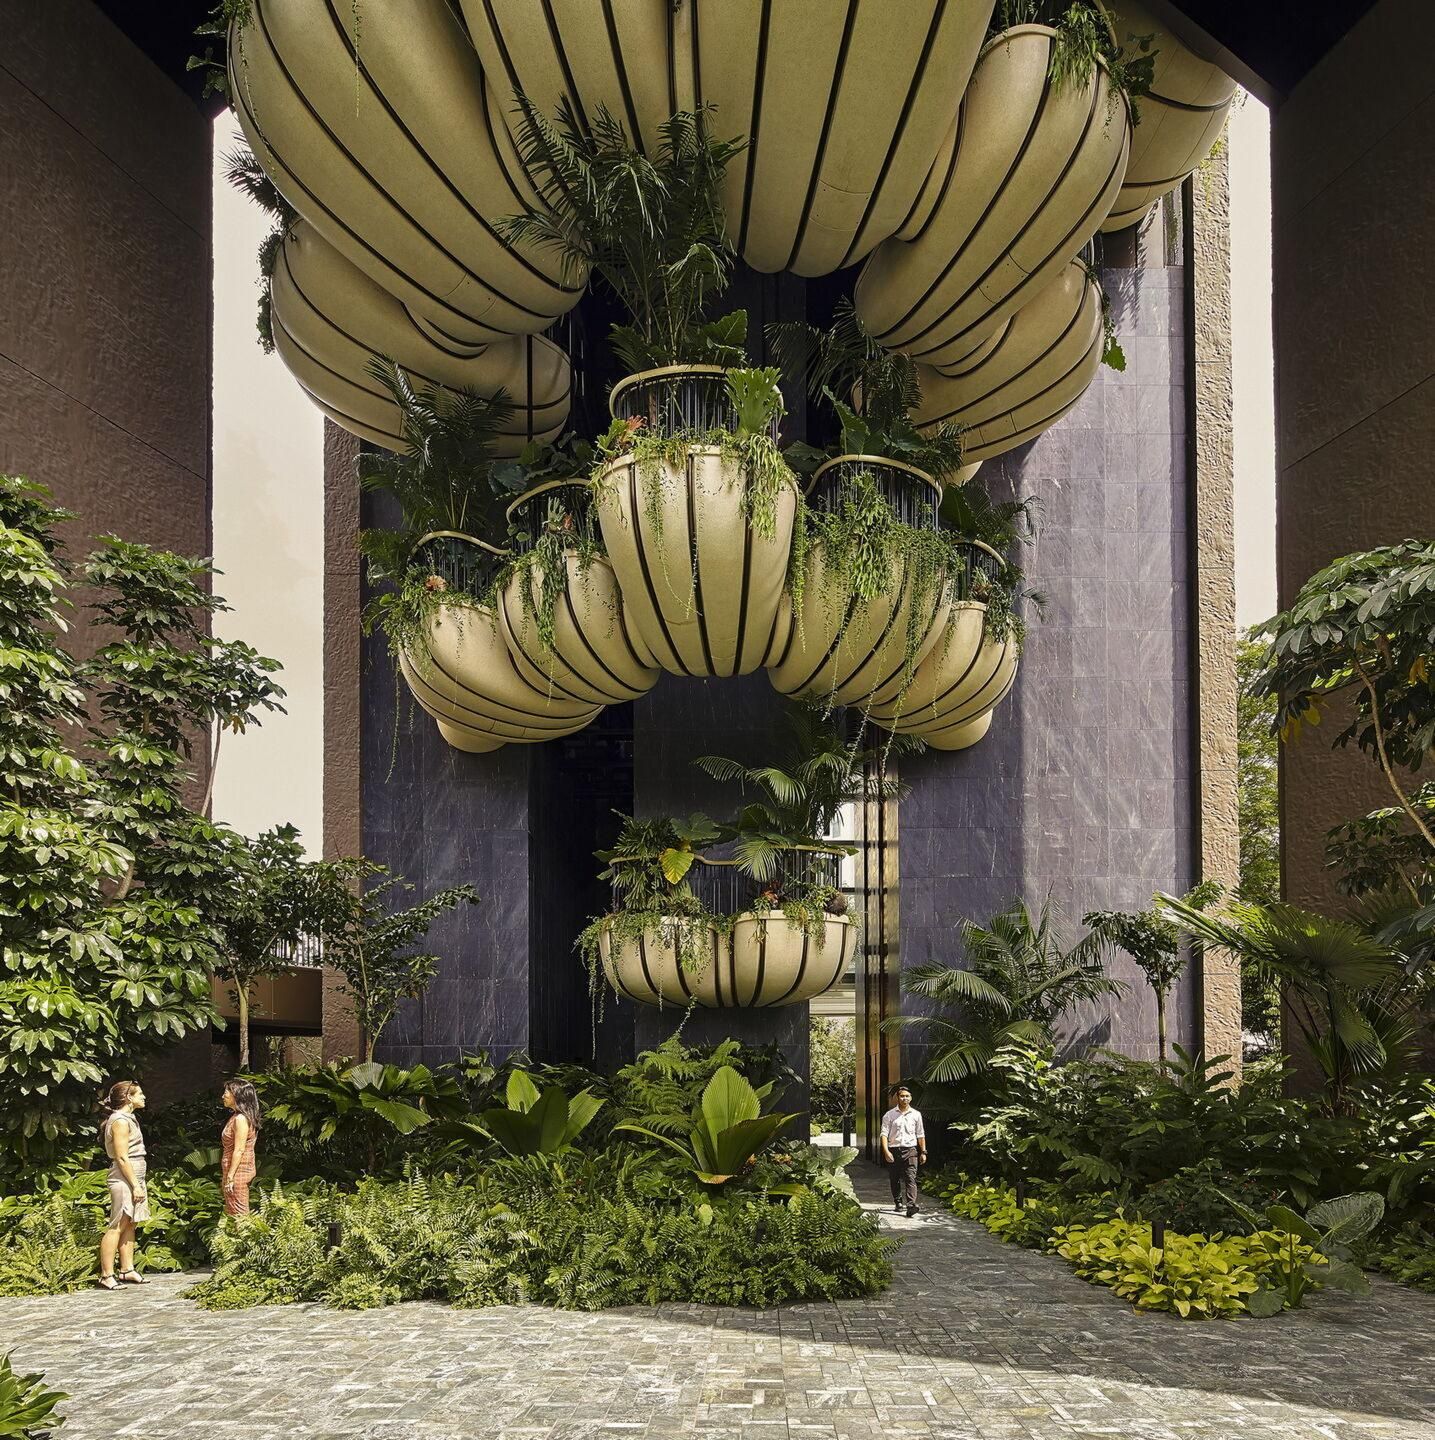 Heatherwick Studio designs tower to become overrun by its lush planting